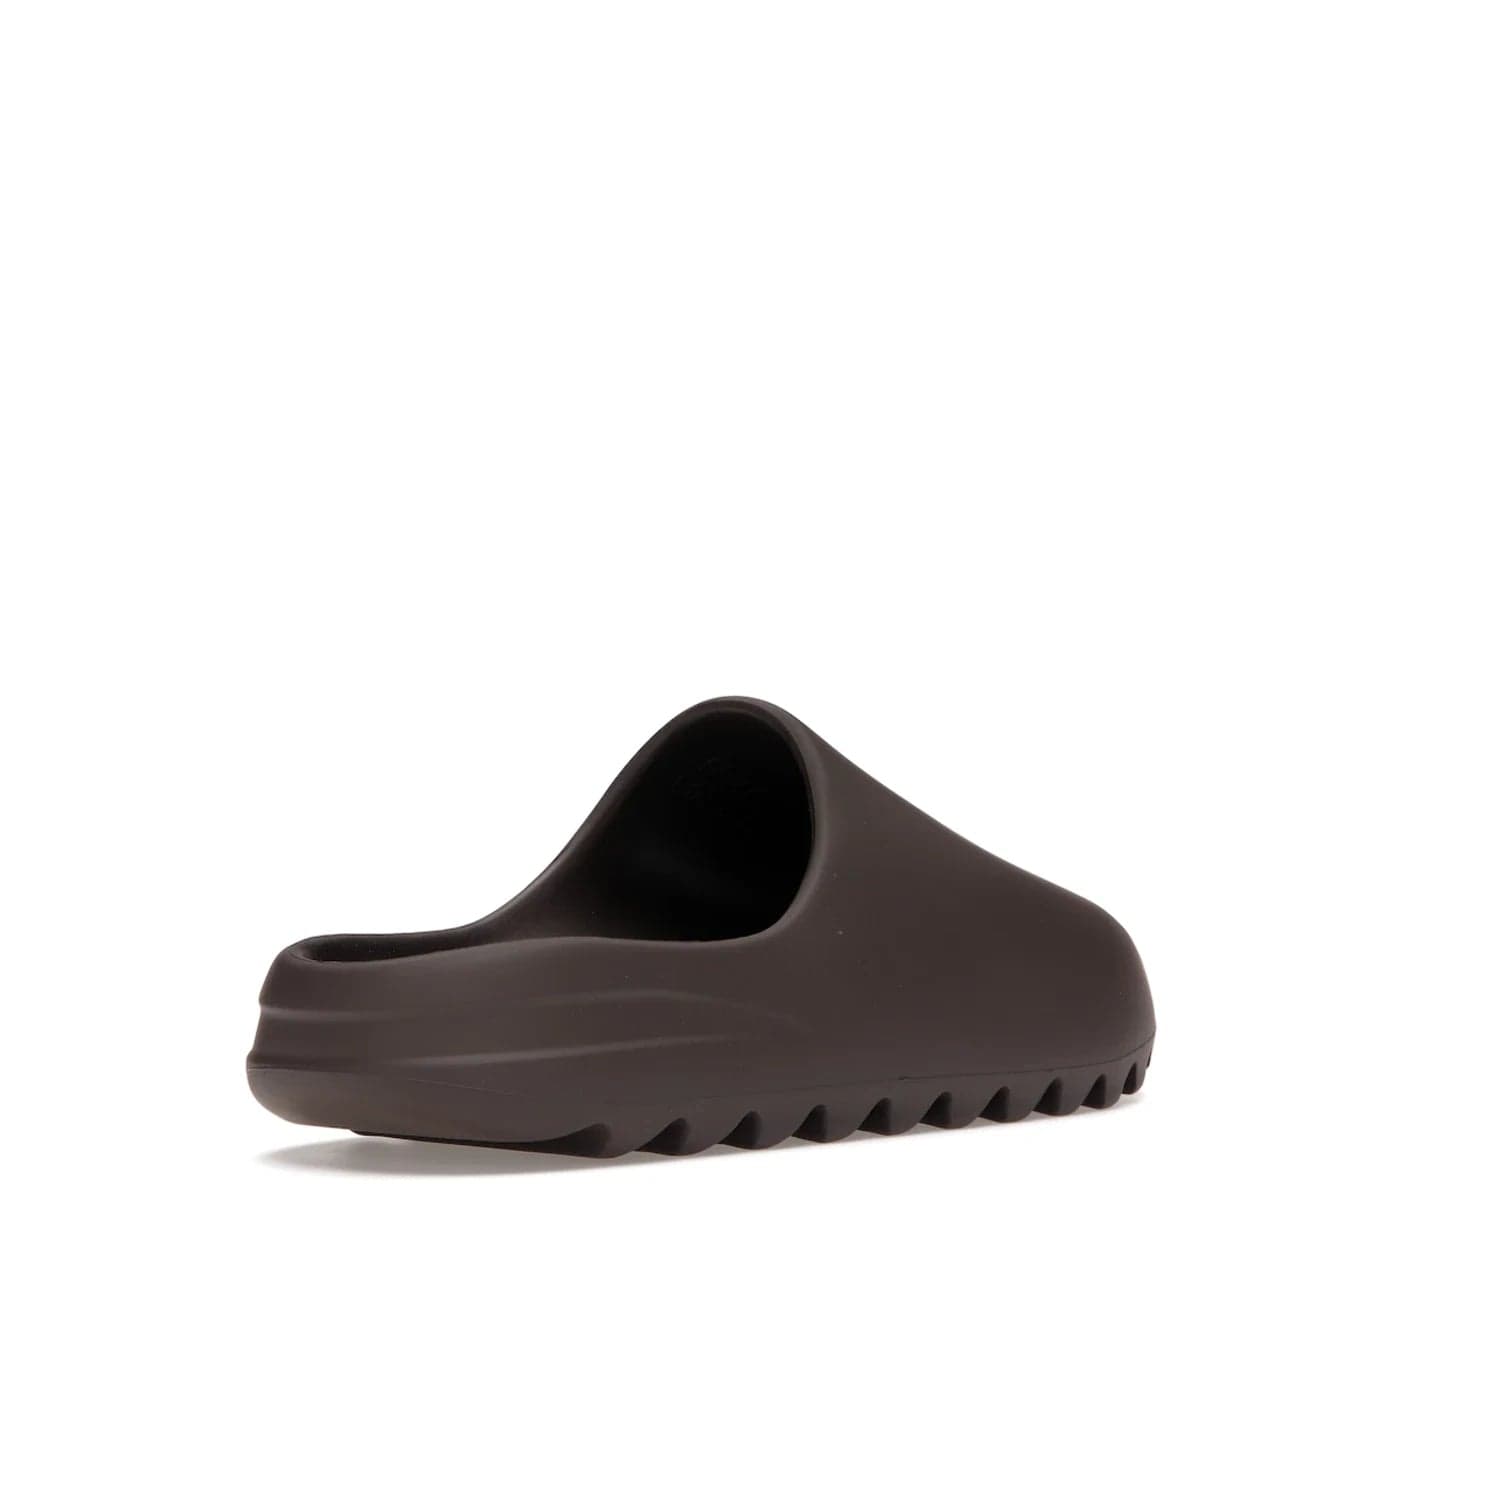 adidas Yeezy Slide Soot - Image 32 - Only at www.BallersClubKickz.com - Shop the Yeezy Slide Soot sneaker by Adidas, a sleek blend of form and function. Monochrome silhouette in Soot/Soot/Soot. Lightweight EVA foam offers comfort and durability. Get the must-have style today.